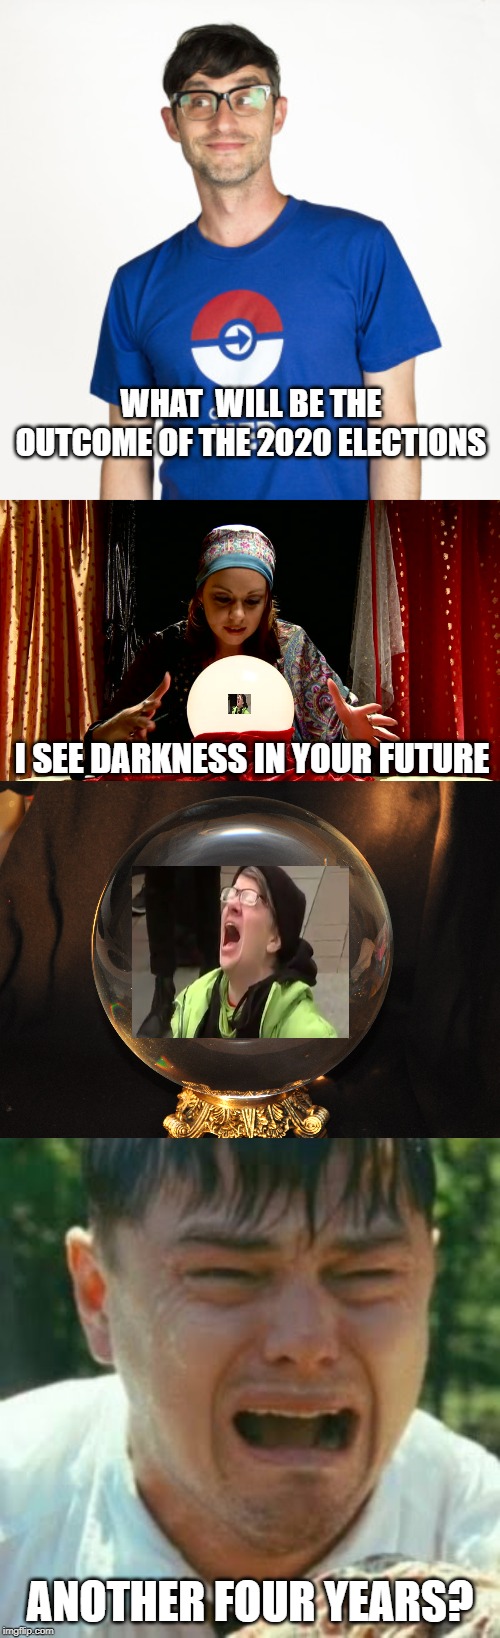 Get Ready For It Libs! | WHAT  WILL BE THE OUTCOME OF THE 2020 ELECTIONS; I SEE DARKNESS IN YOUR FUTURE; ANOTHER FOUR YEARS? | image tagged in soyboy,screaming liberal,crystal ball,psychic with crystal ball,election 2020,trump 2020 | made w/ Imgflip meme maker